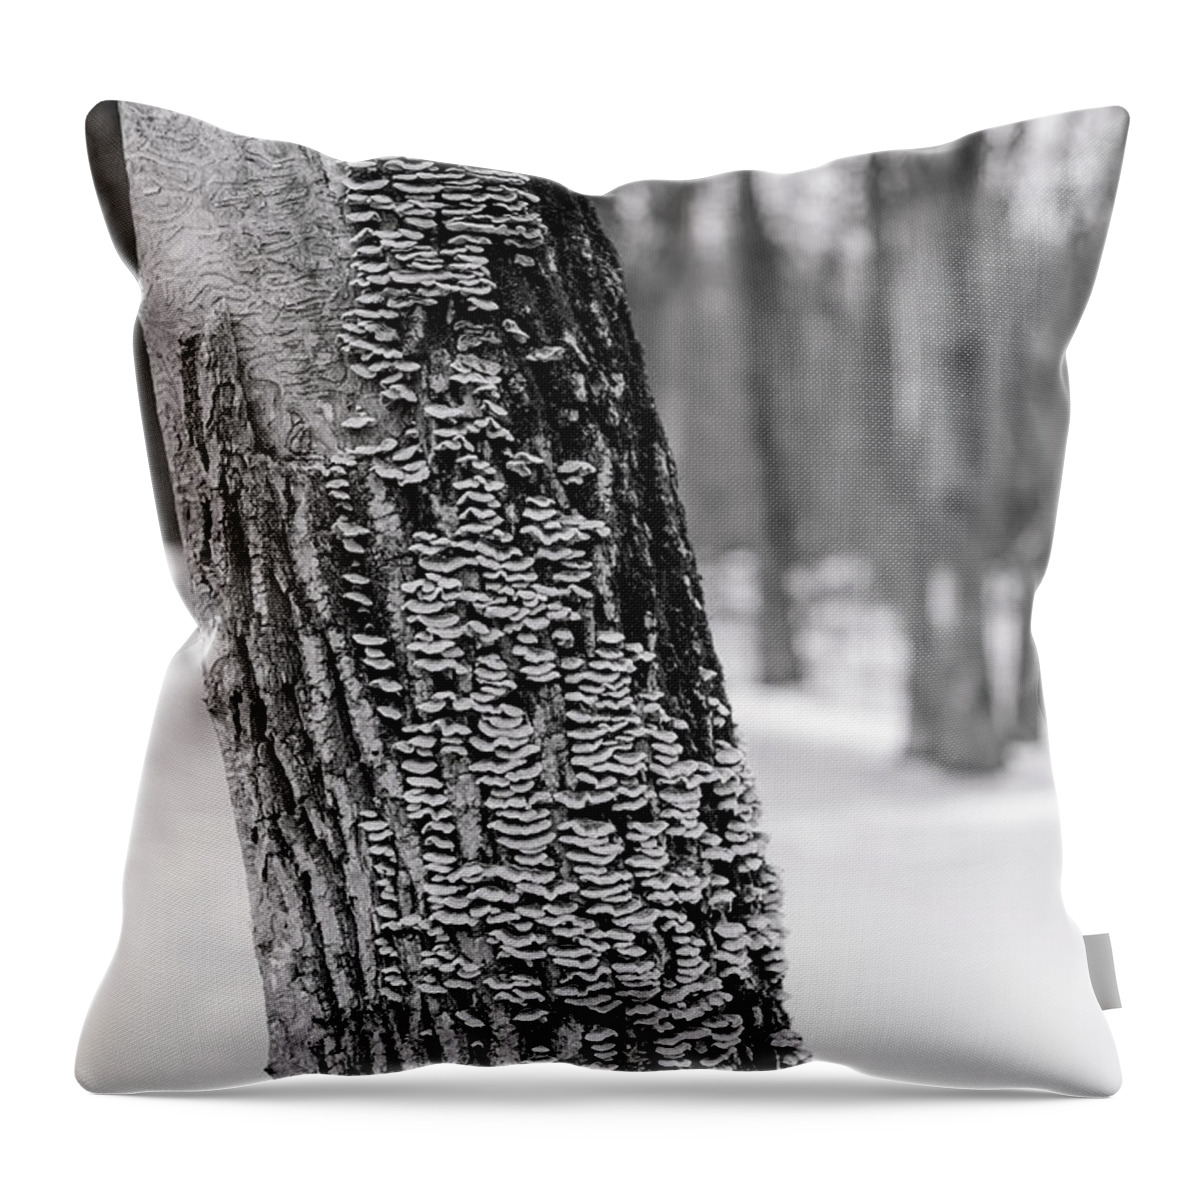 Winterpacht Throw Pillow featuring the photograph Chicago Winter Trees by Miguel Winterpacht